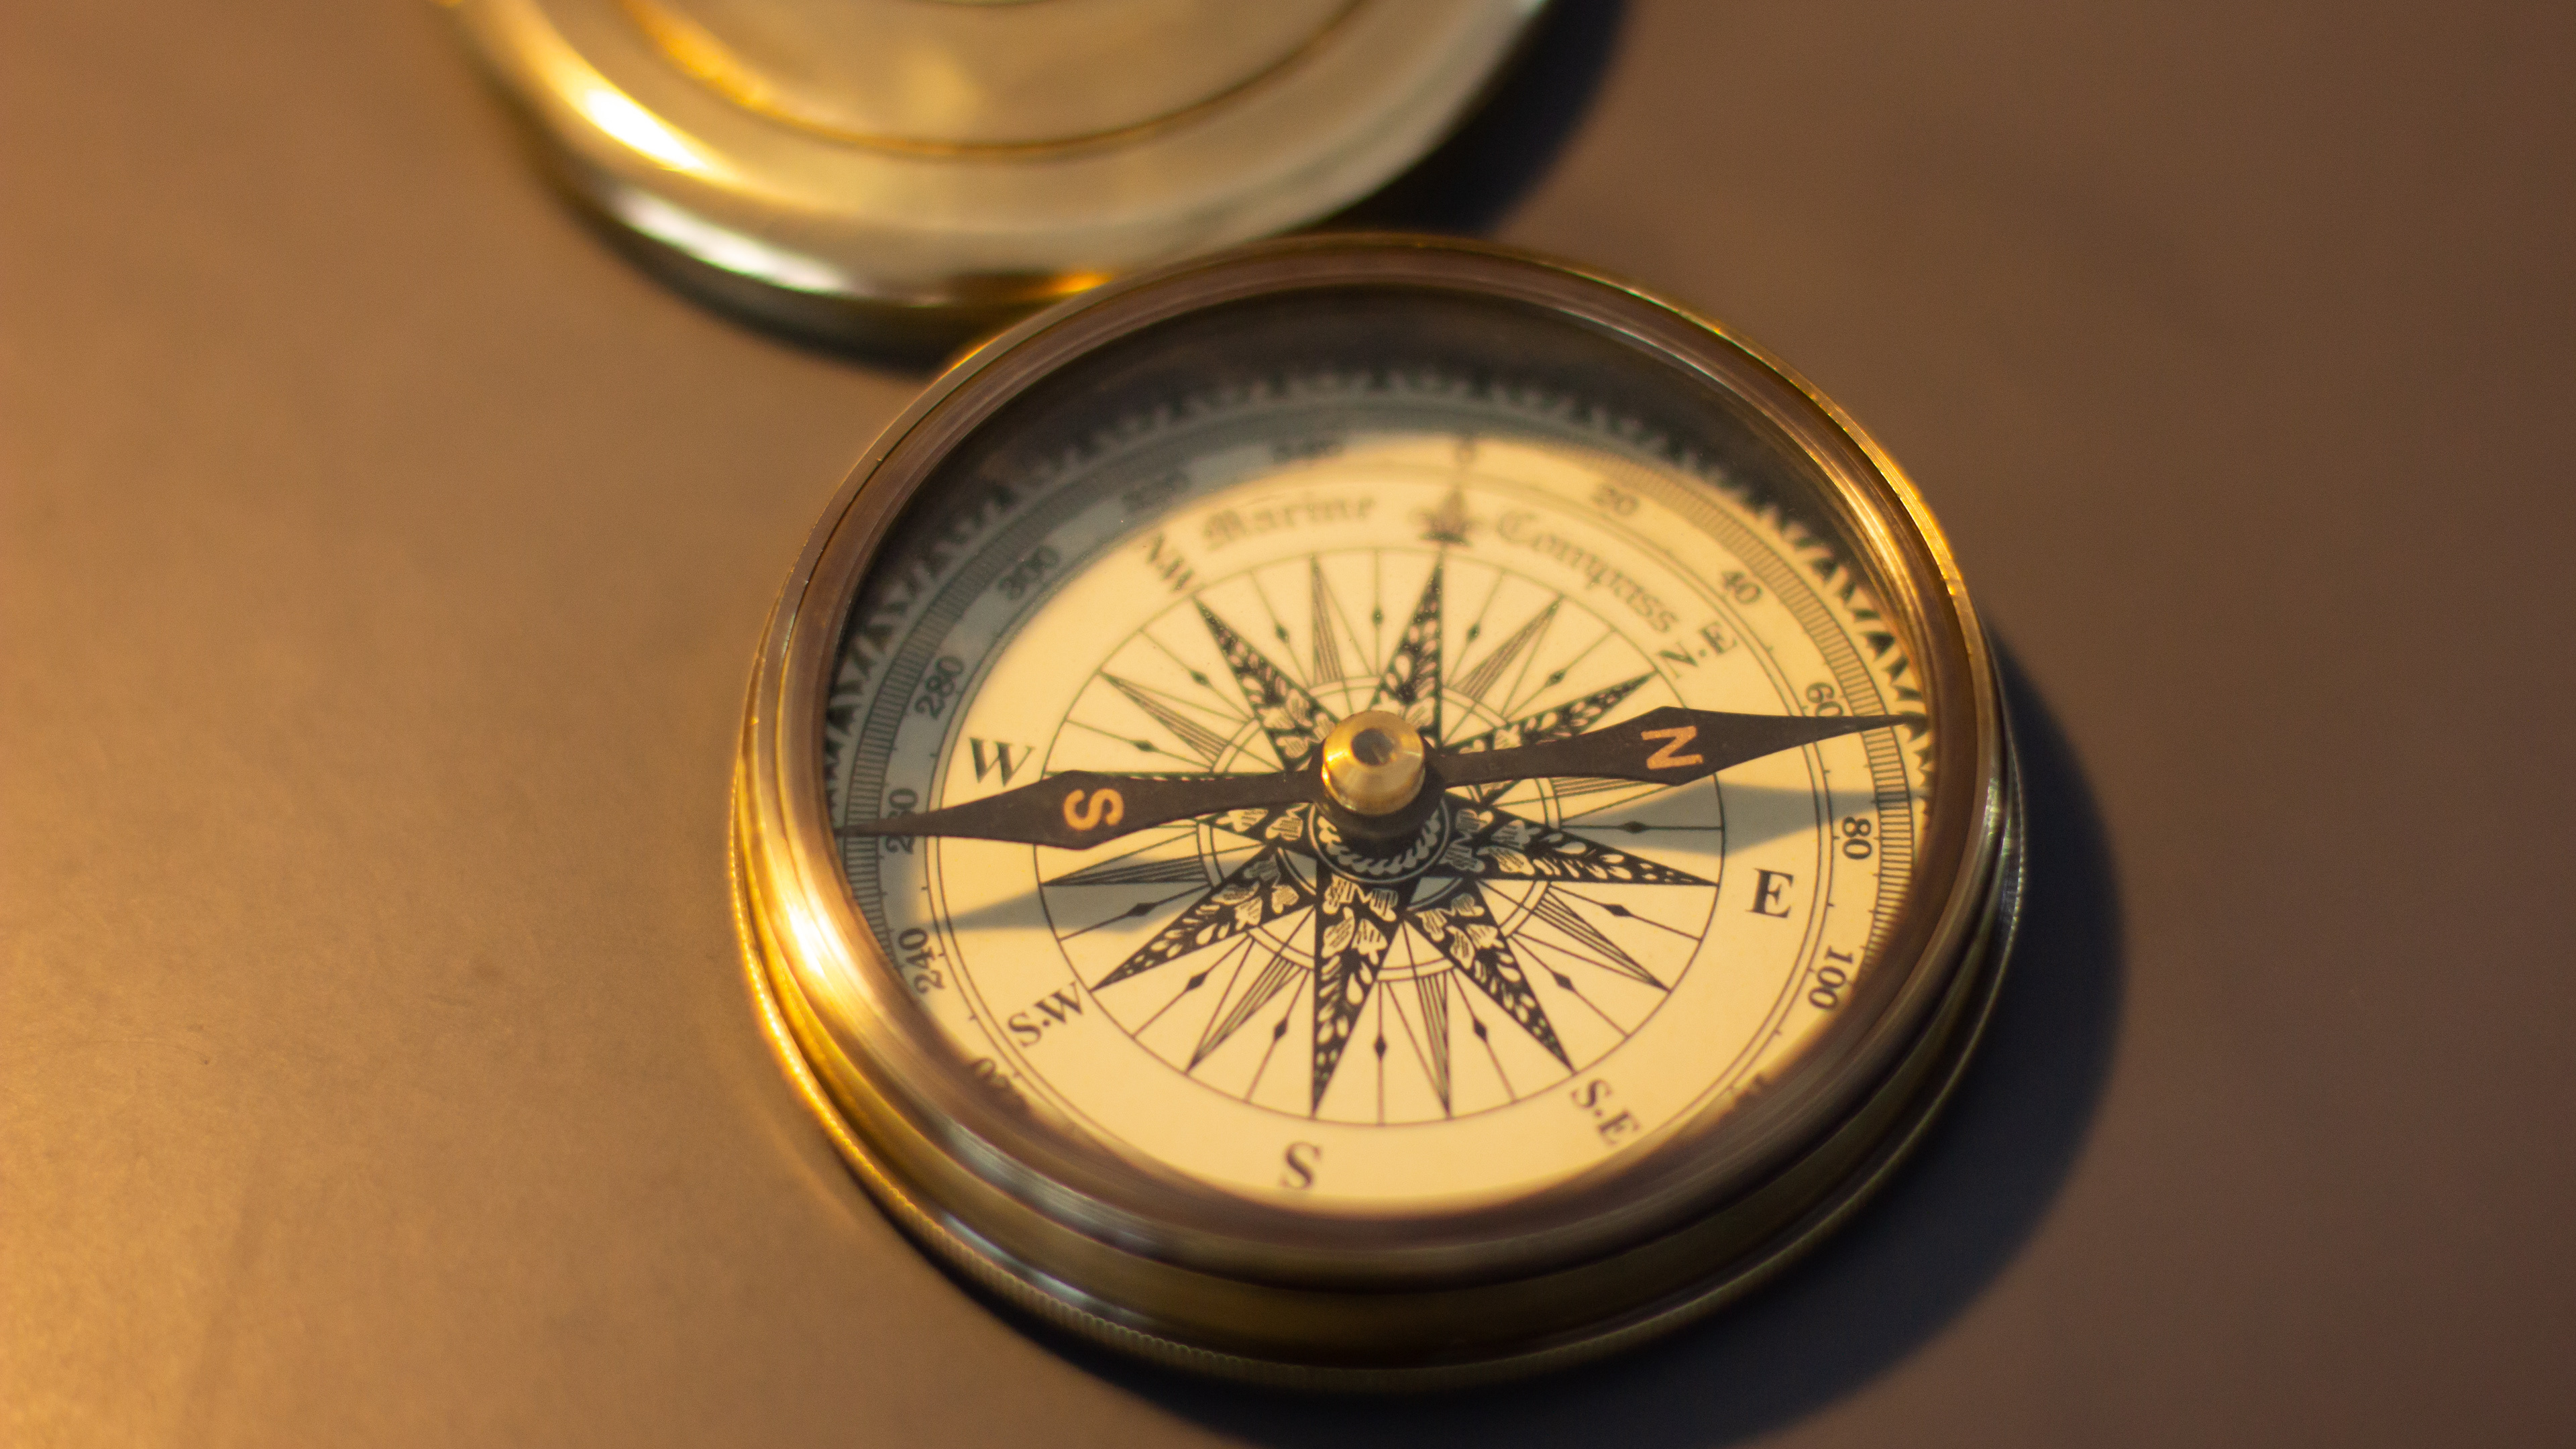 Silver and gold compass, Gray surface, Free stock photo, Precise navigation, 3840x2160 4K Desktop